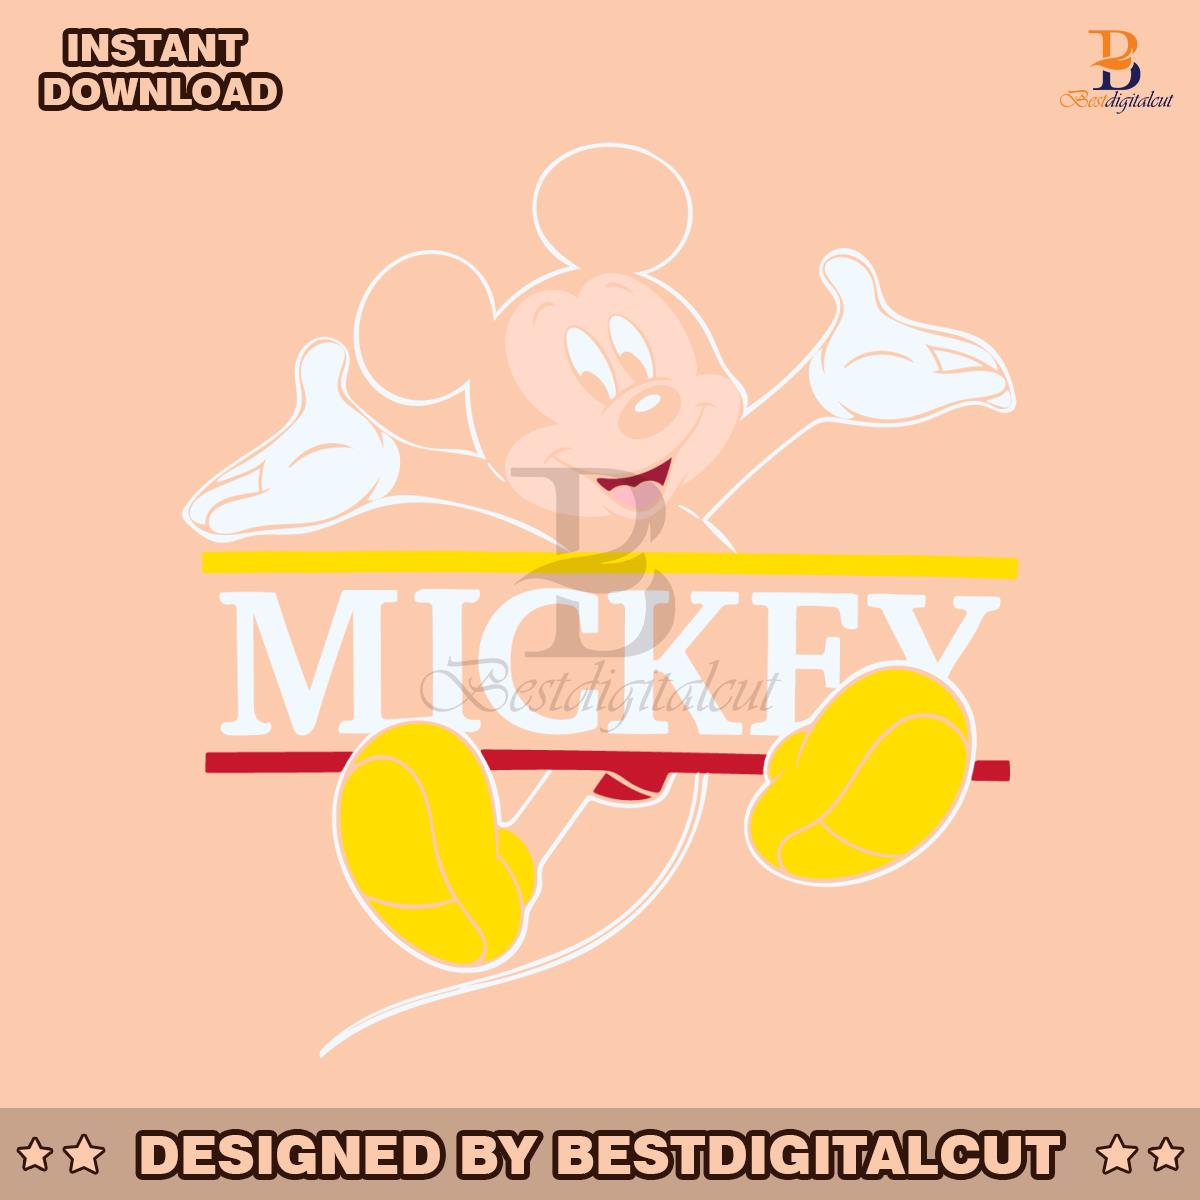 cute-mickey-mouse-disney-character-svg